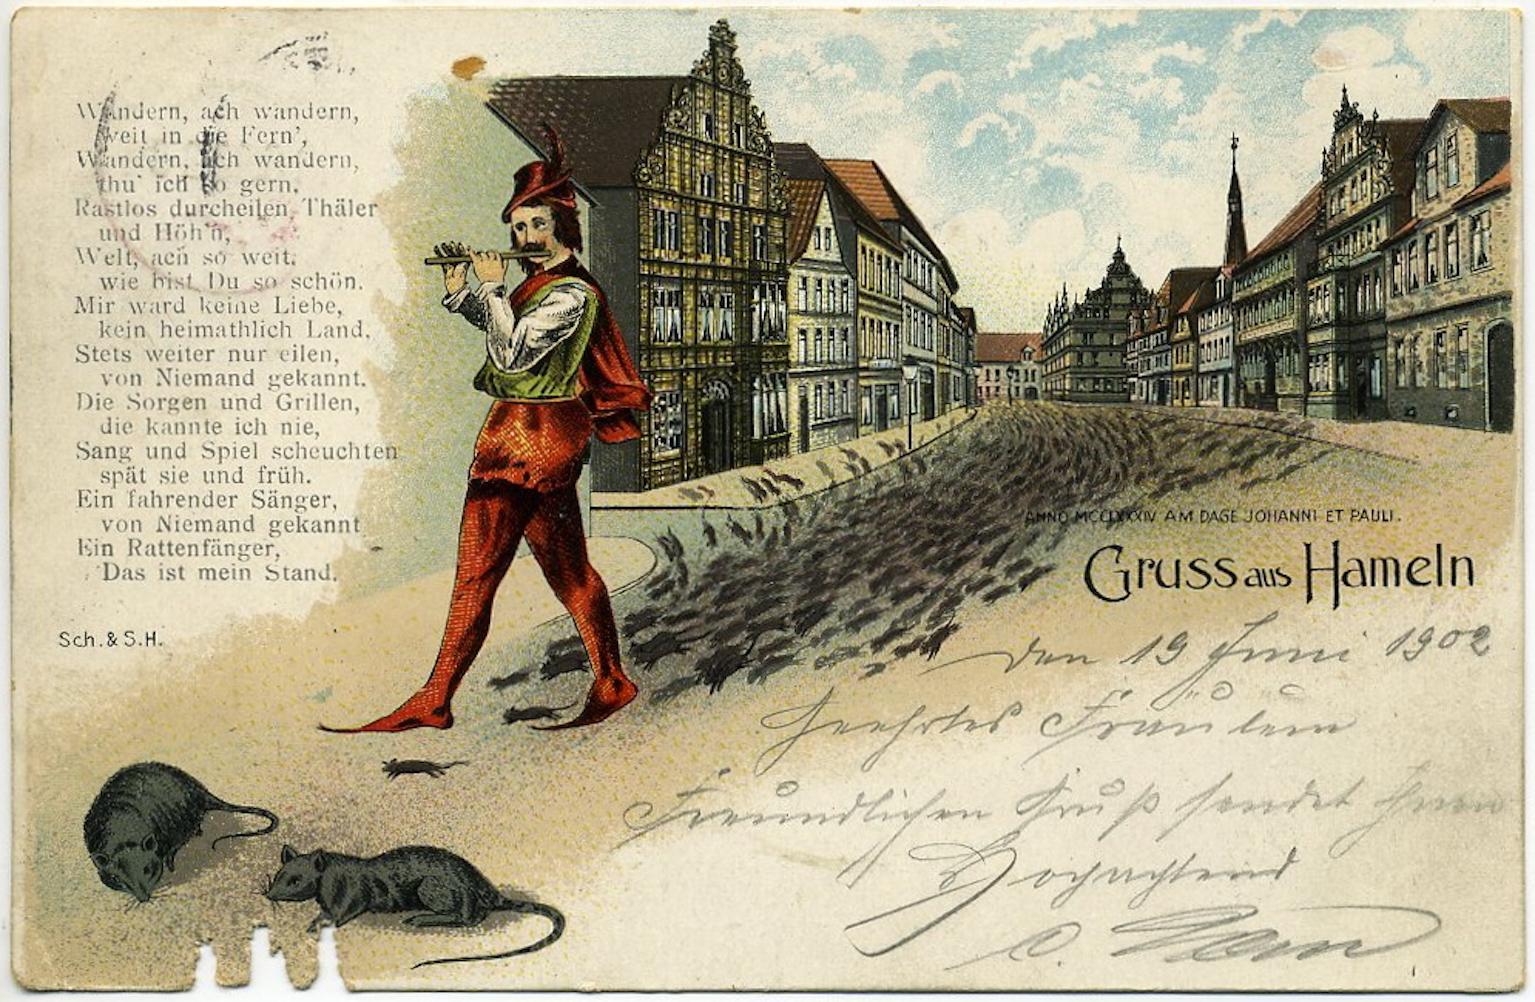 Tackle Today: ⚠ Do not follow the Pied Piper of Hamelin (Image: Litho Gruss aus Hameln, 1902 - Source Wikimedia Commons)